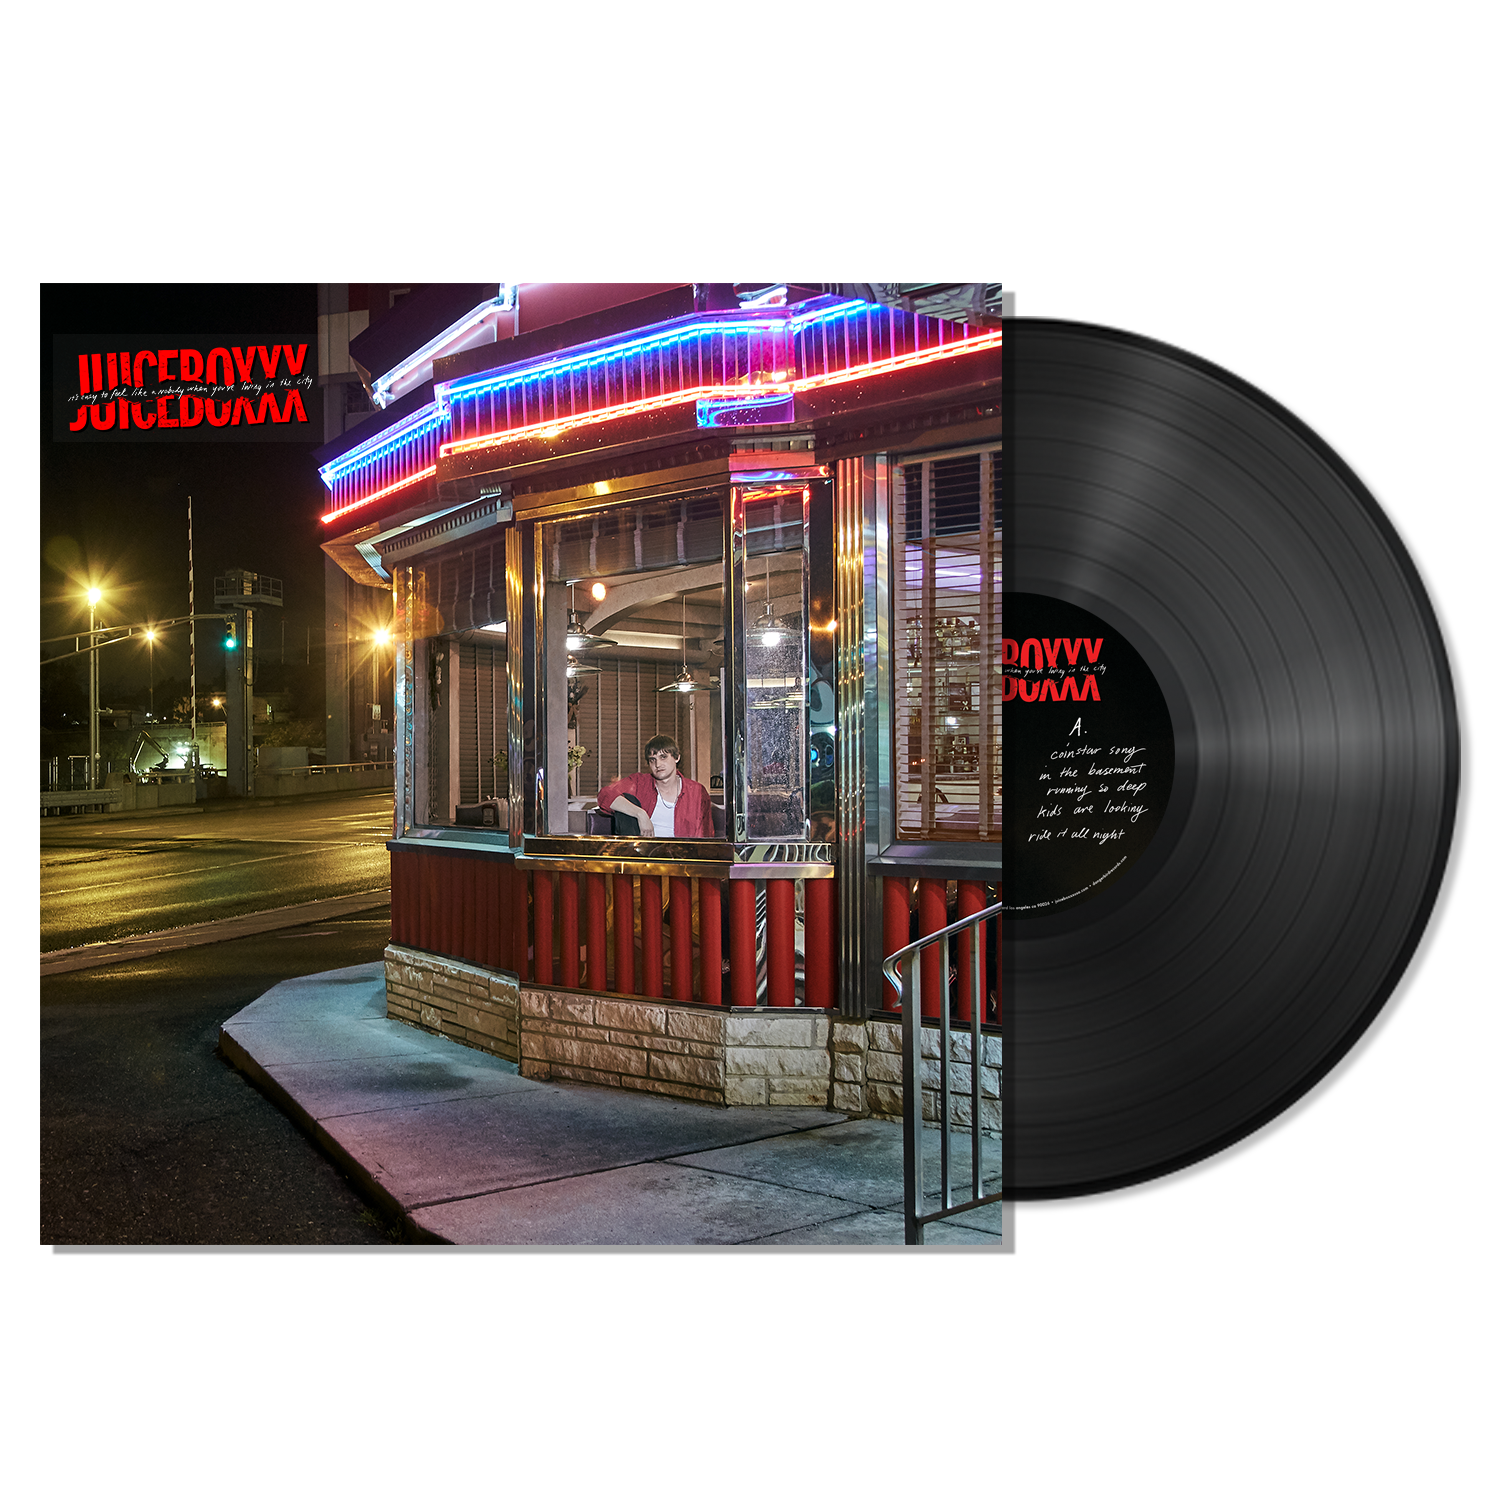 Juiceboxxx - It’s Easy To Feel Like A Nobody When You’re Living In The City - New Lp Record 2020 DANGERBIRD USA Black Vinyl & Download - Indie Rock / Pop Rap